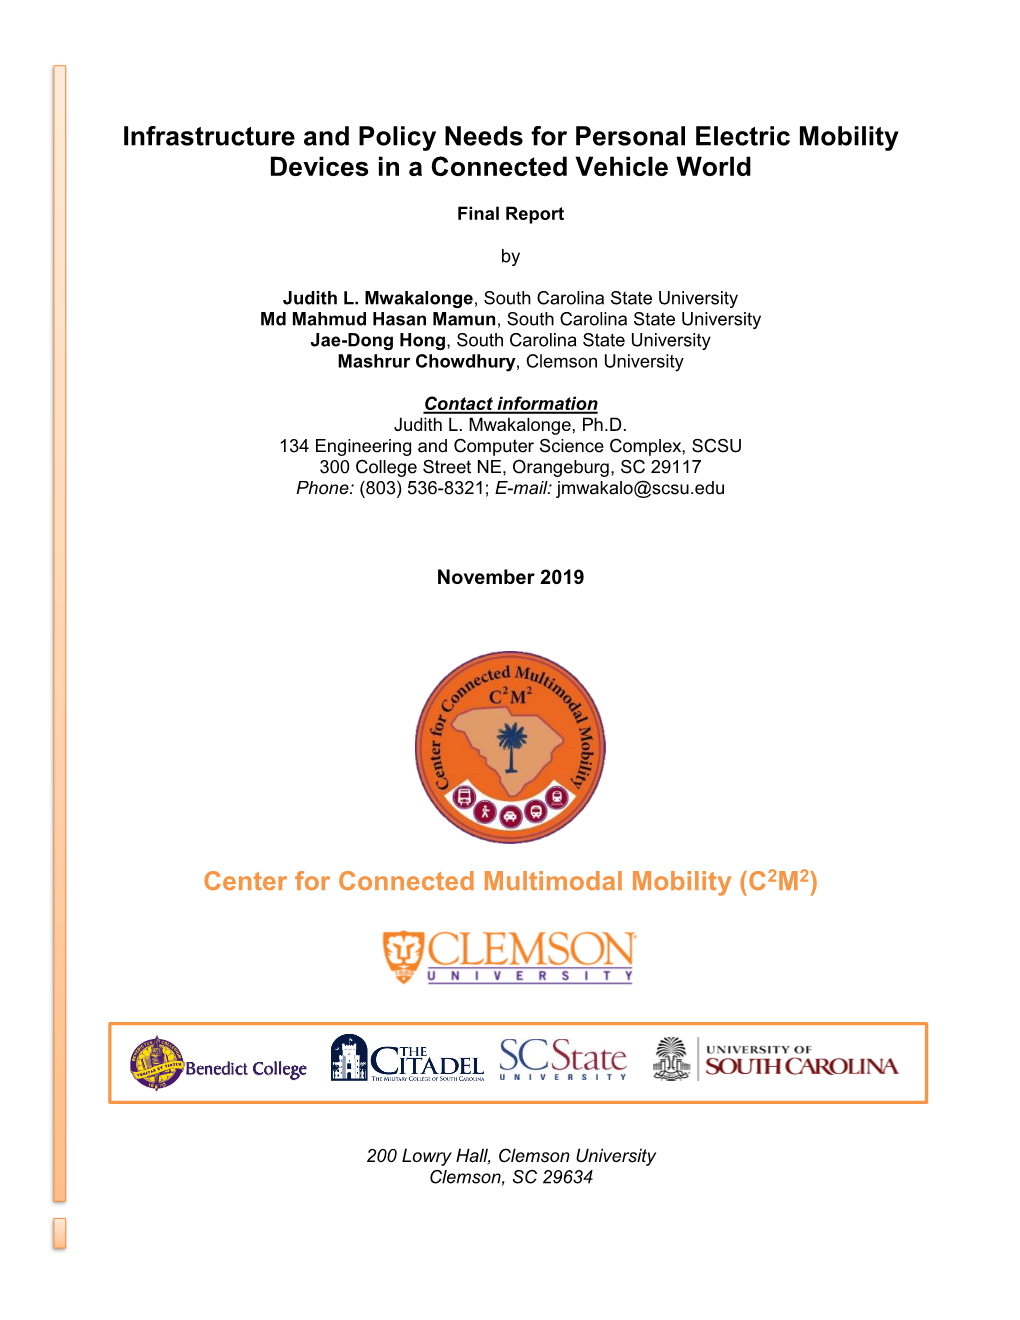 Infrastructure and Policy Needs for Personal Electric Mobility Devices in a Connected Vehicle World